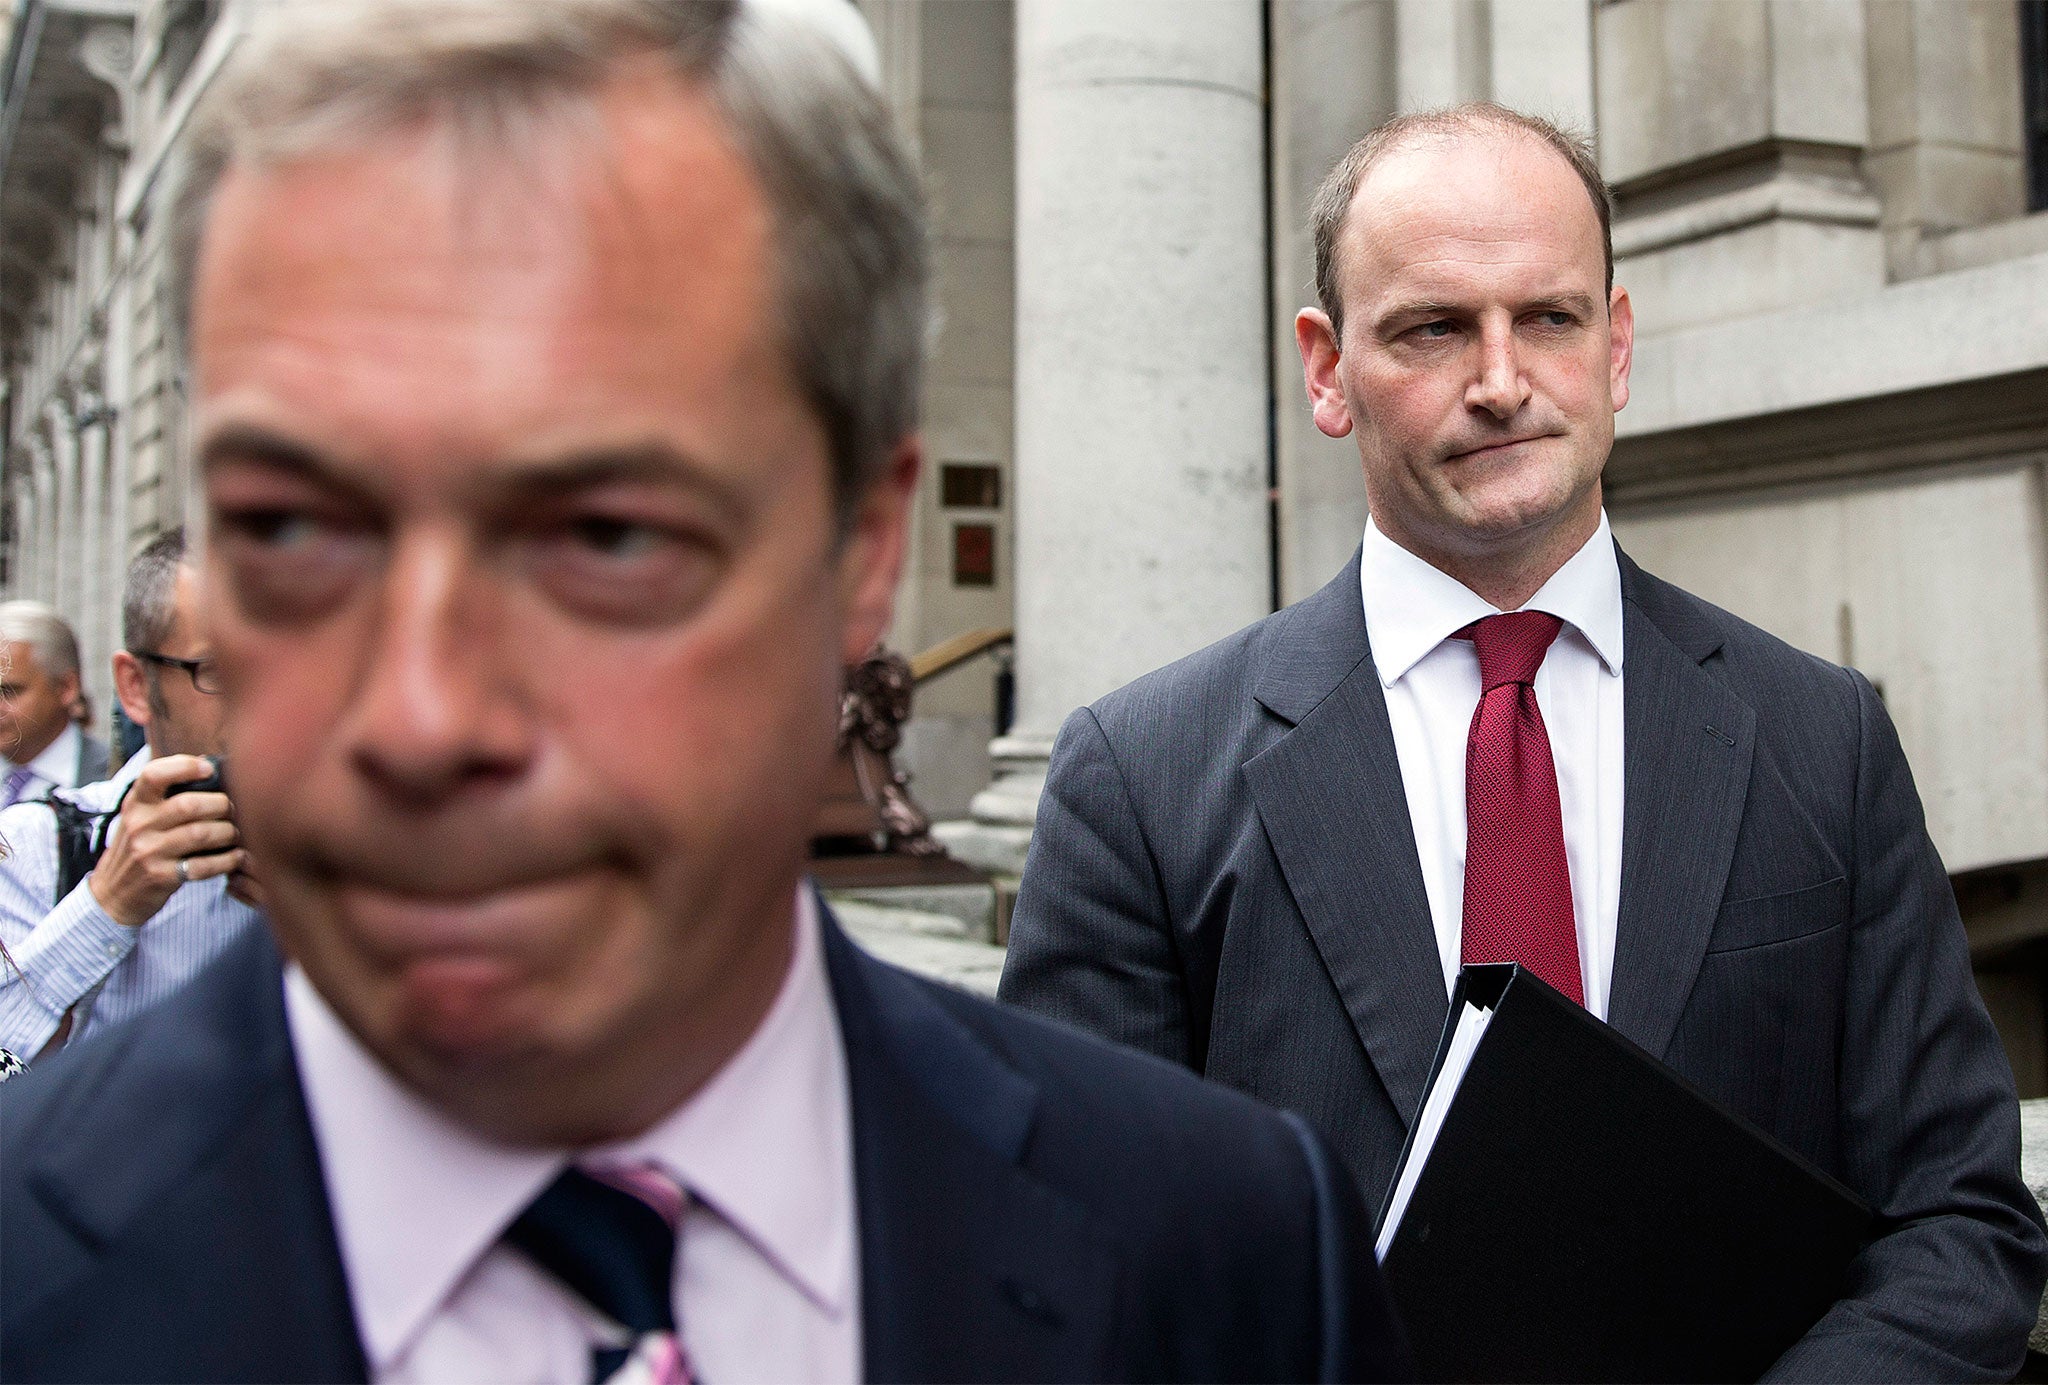 Douglas Carswell has previously claimed Farage's comments on immigrants with HIV were 'ill-advised'